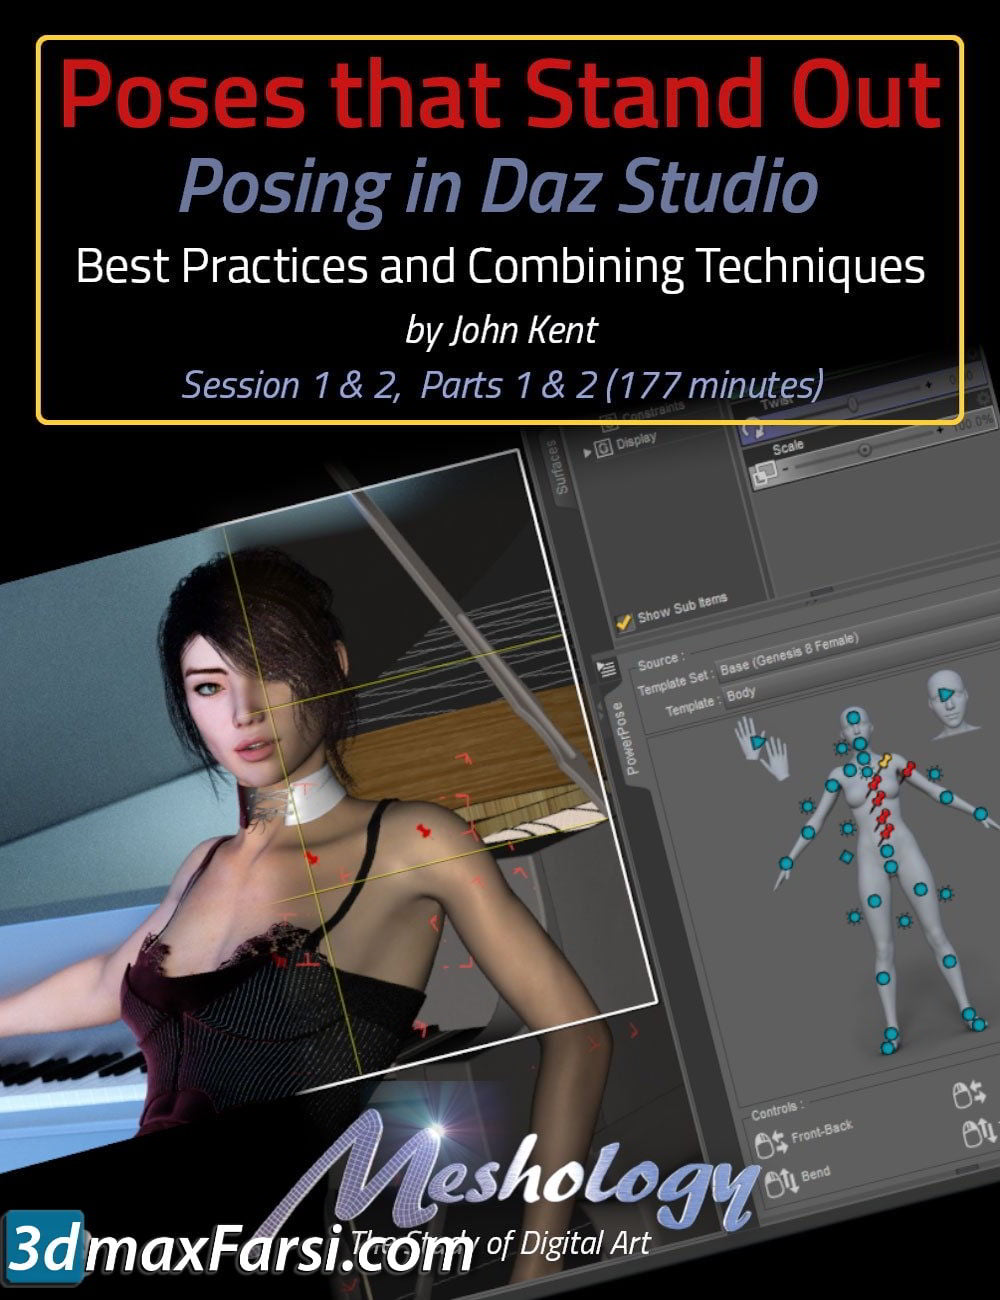 FREE - G3/8 Models - Tattoos - Make-up - Morphs - Poses and more! - Daz 3D  Forums